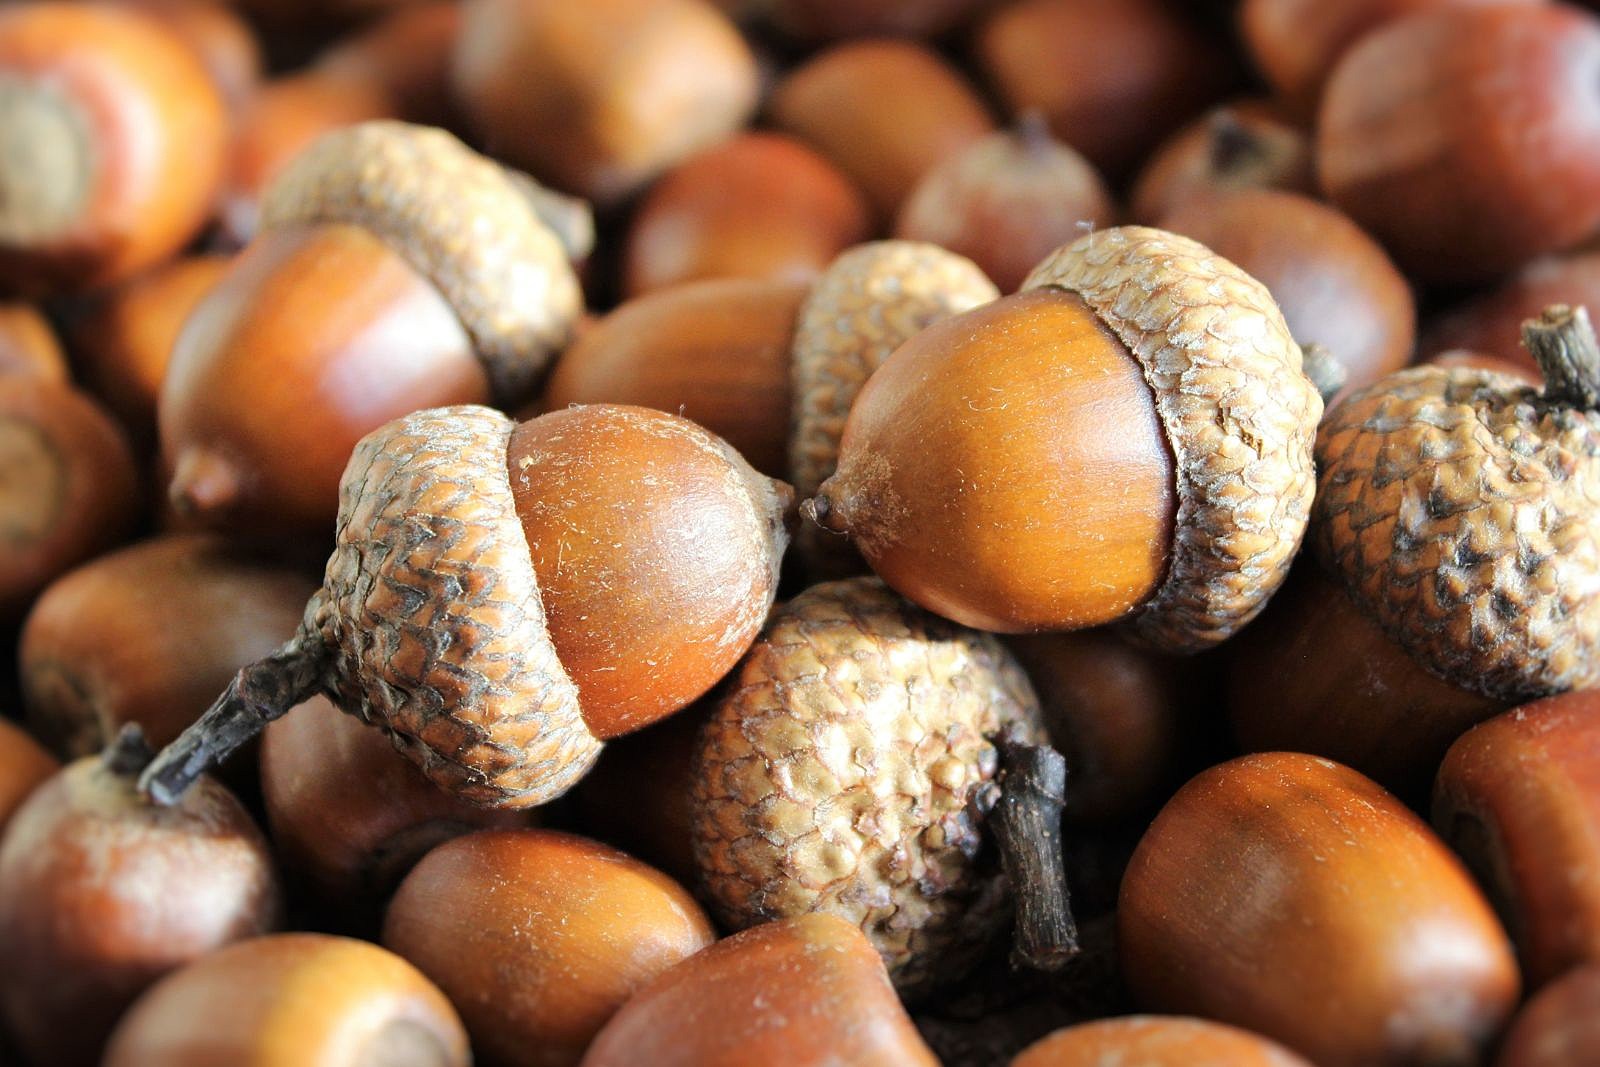 Oak trees keep dropping acorns this fall. Here's how a 'mast' year